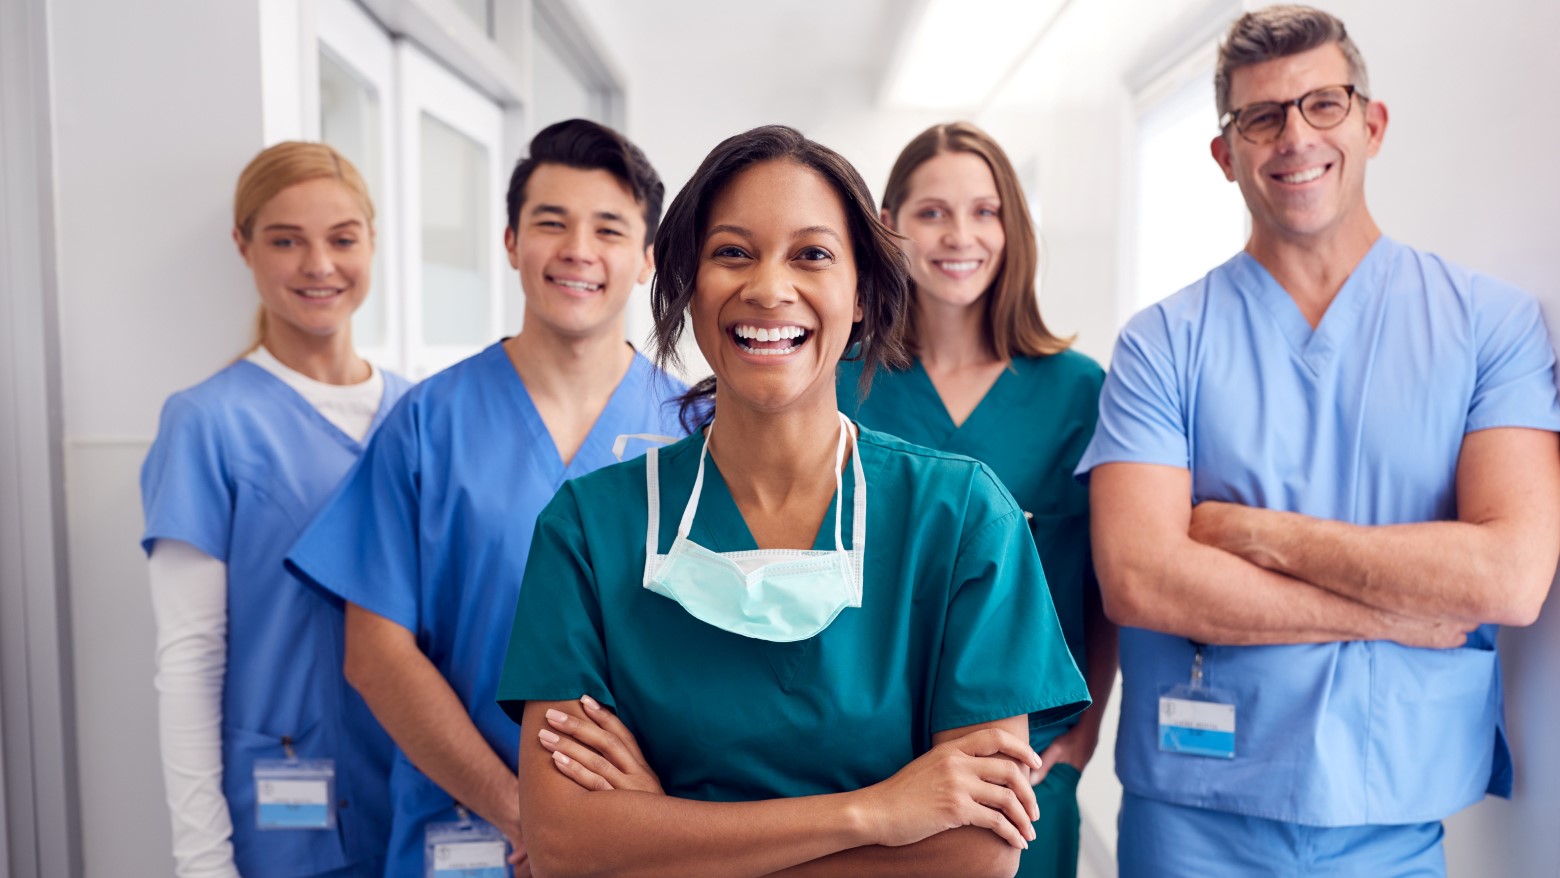 group of doctors standing together smiling